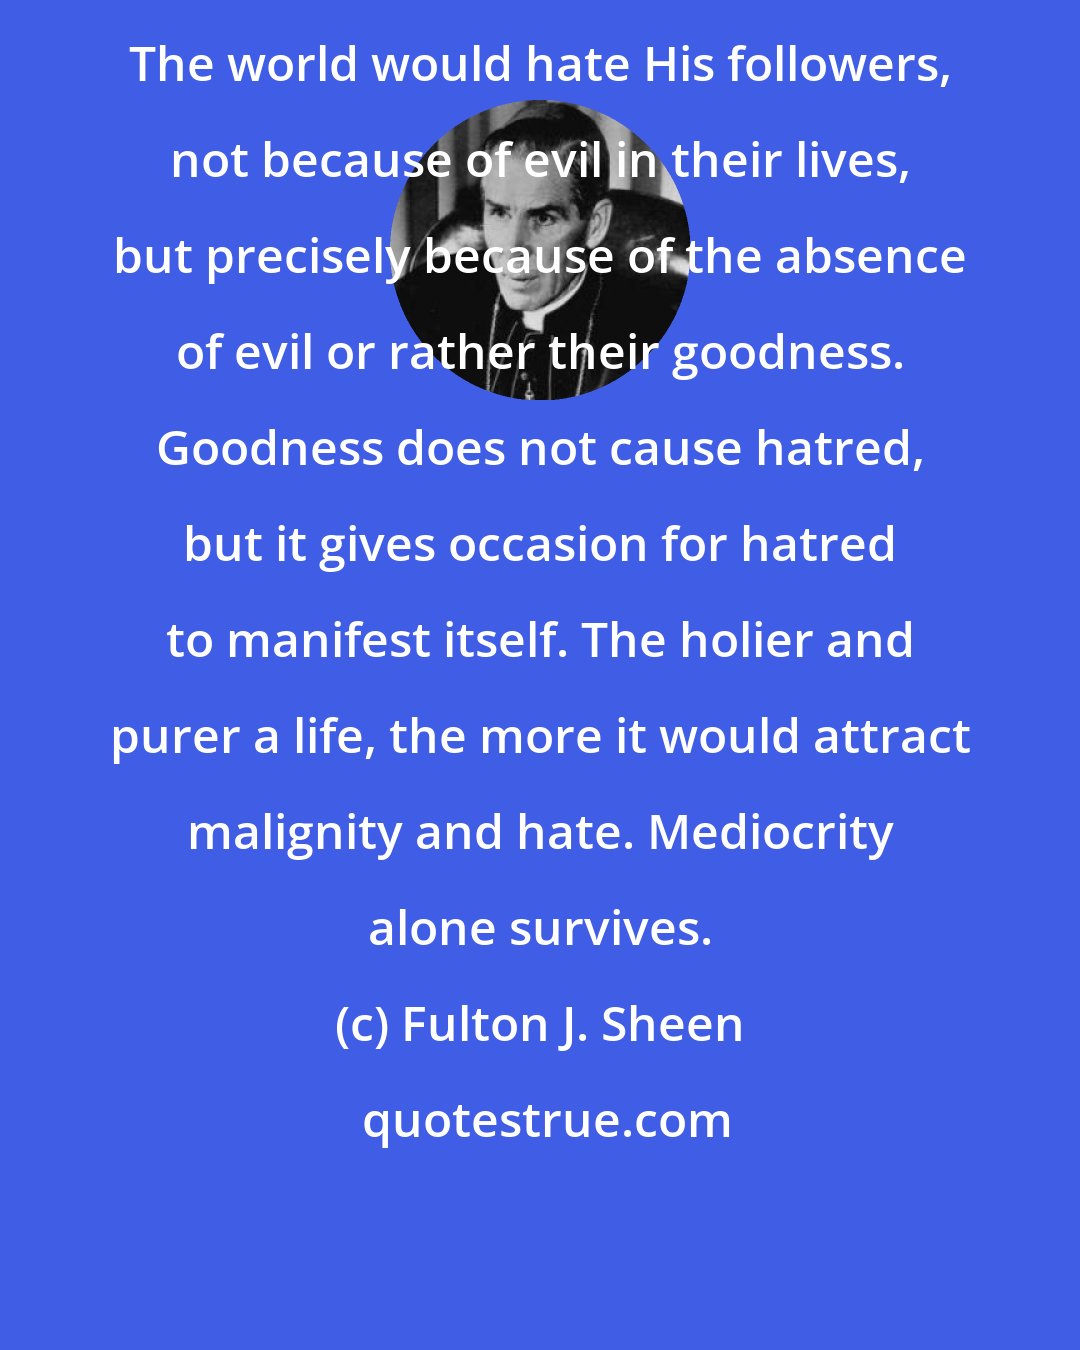 Fulton J. Sheen: The world would hate His followers, not because of evil in their lives, but precisely because of the absence of evil or rather their goodness. Goodness does not cause hatred, but it gives occasion for hatred to manifest itself. The holier and purer a life, the more it would attract malignity and hate. Mediocrity alone survives.